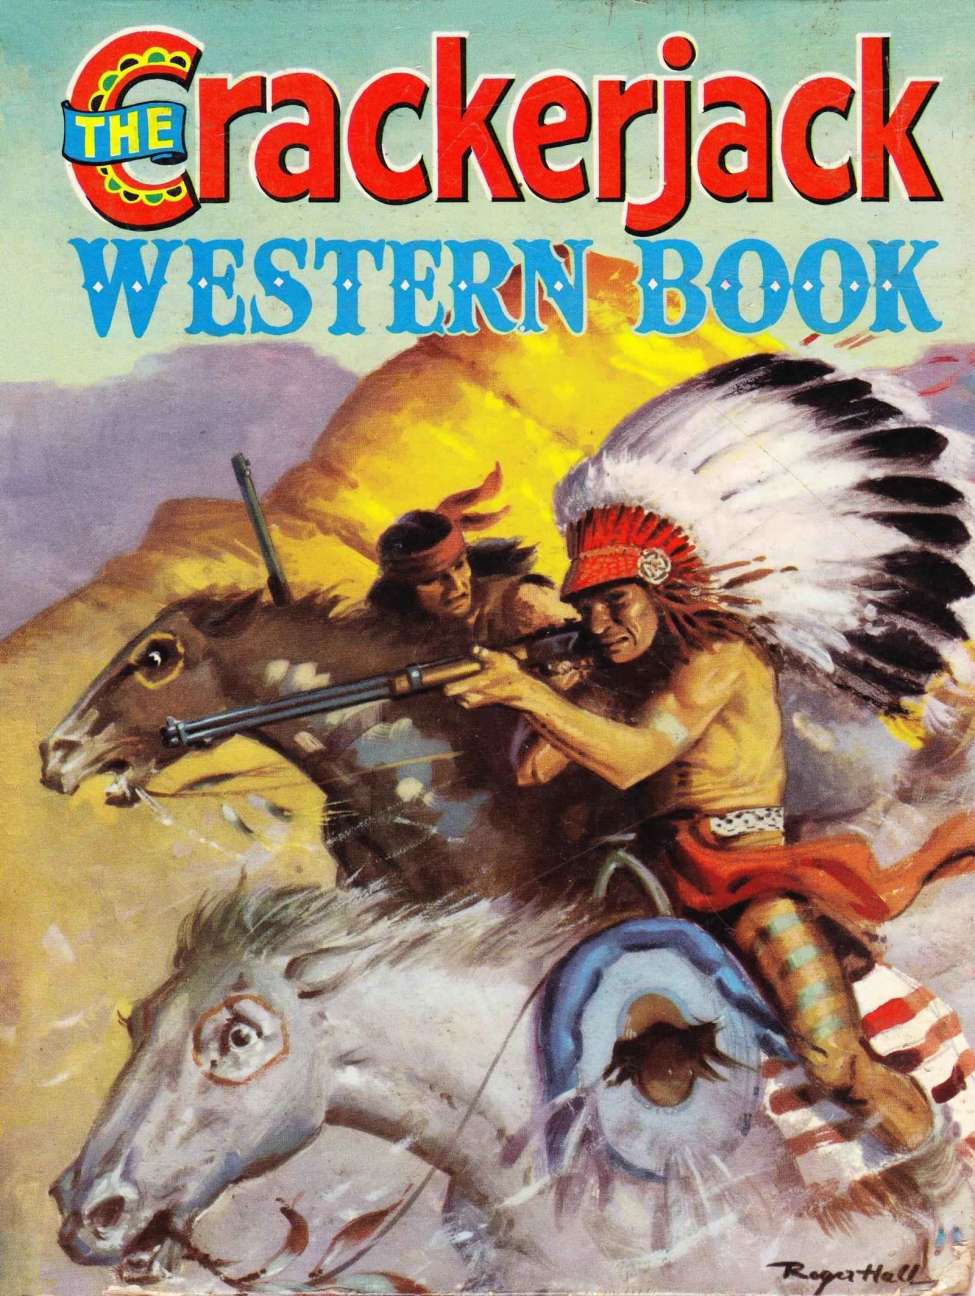 Comic Book Cover For Crackerjack Western Book 1959